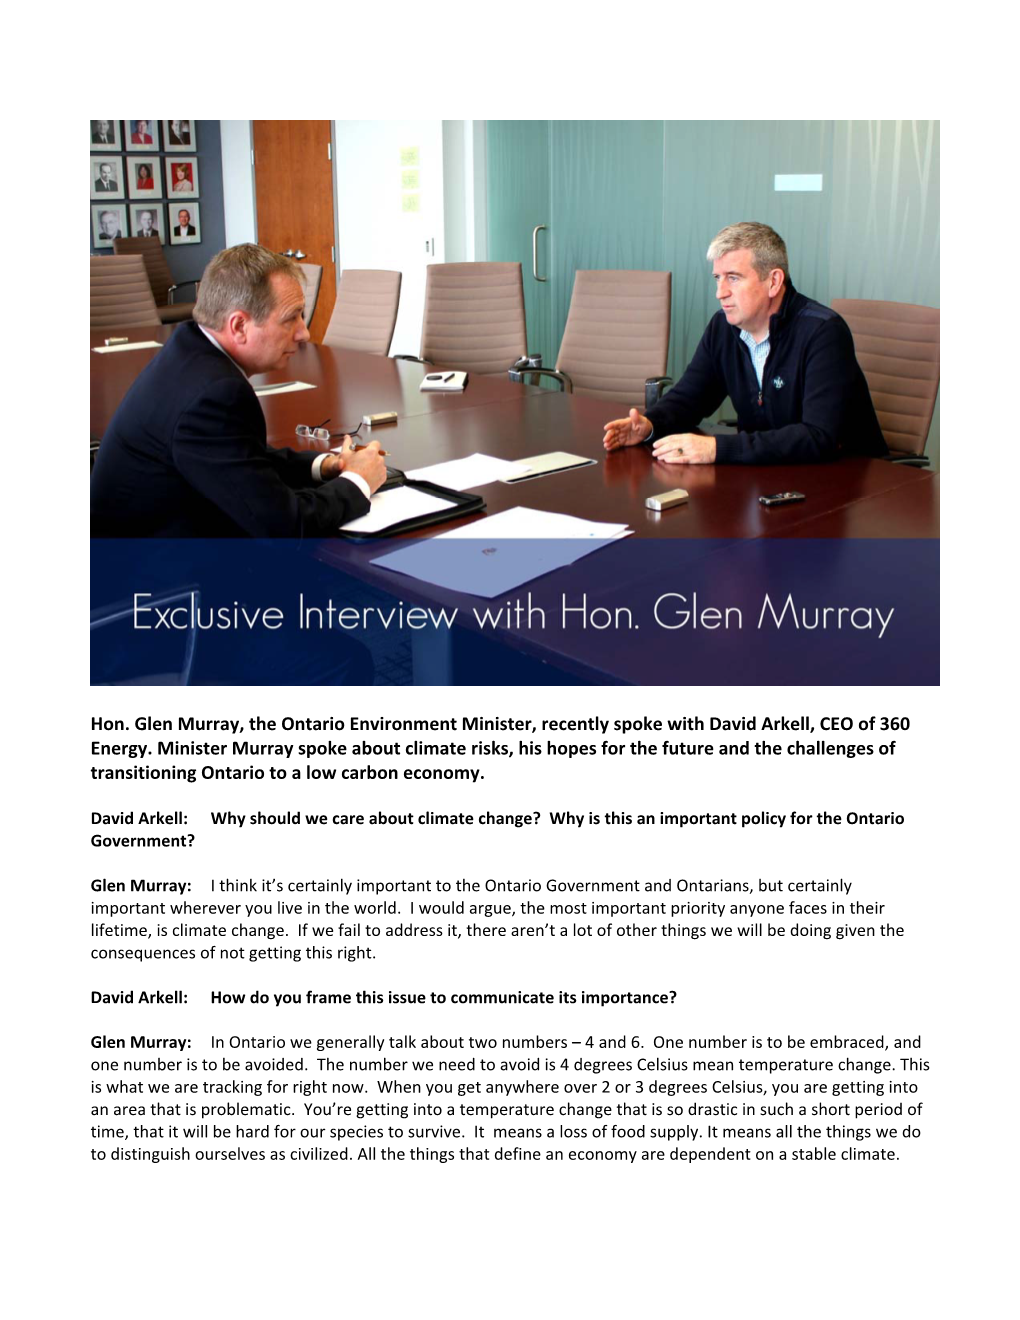 Hon. Glen Murray, the Ontario Environment Minister, Recently Spoke with David Arkell, CEO of 360 Energy